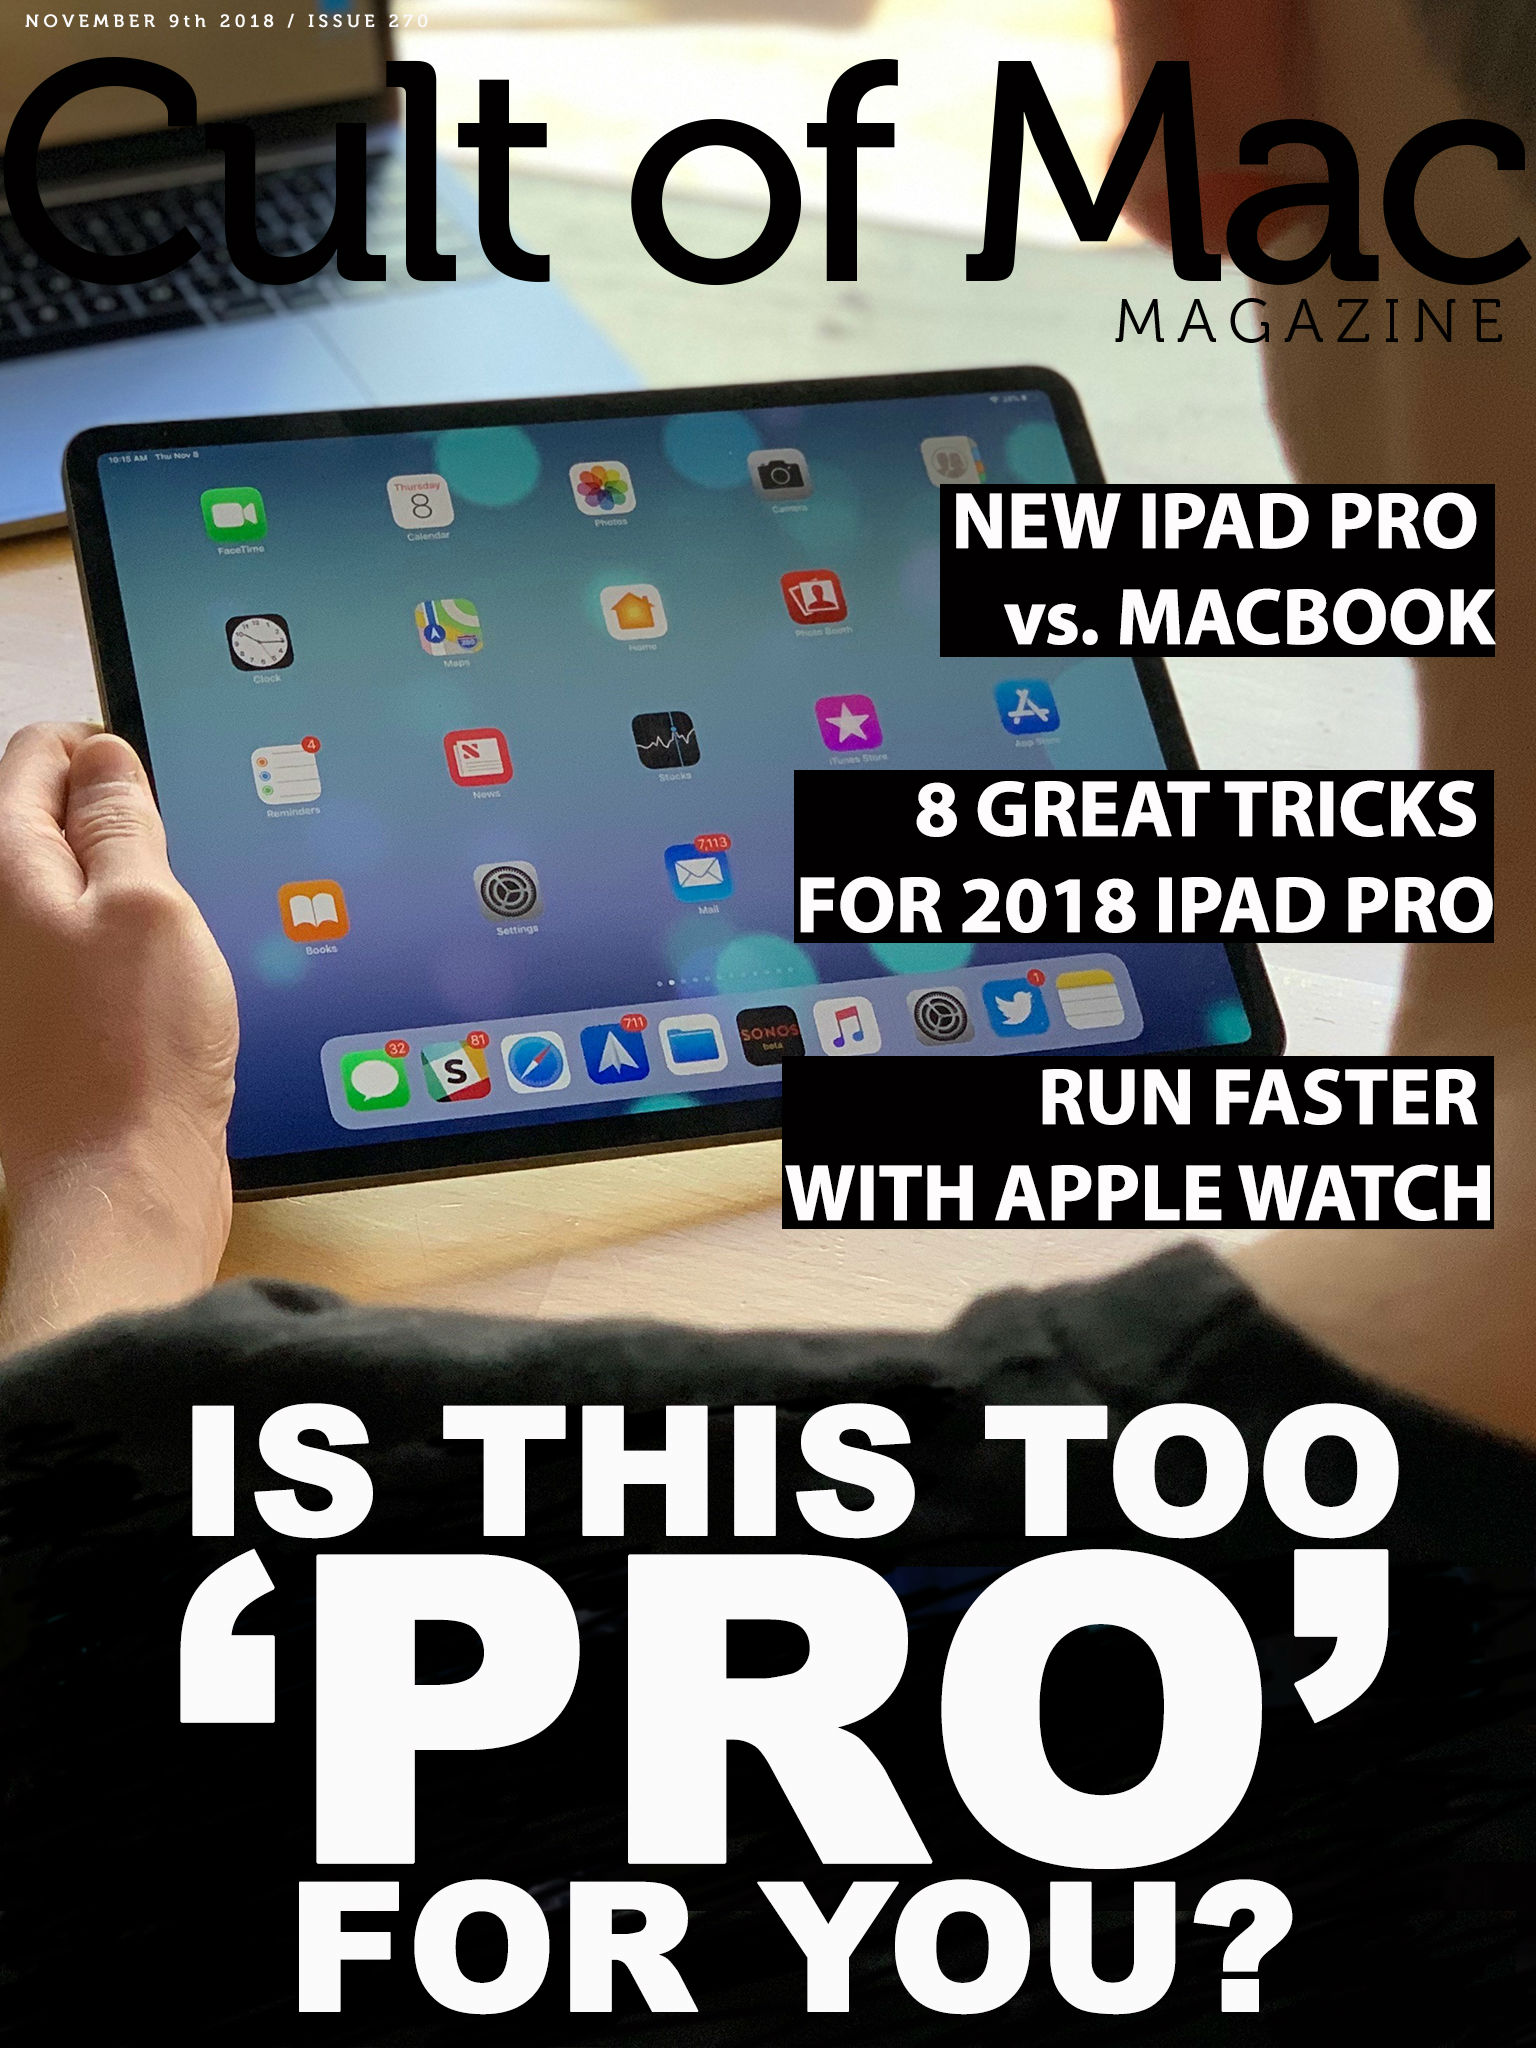 Cult of Mac Magazine: It's not *all* about the new iPad Pro this week. (Mostly, though.)